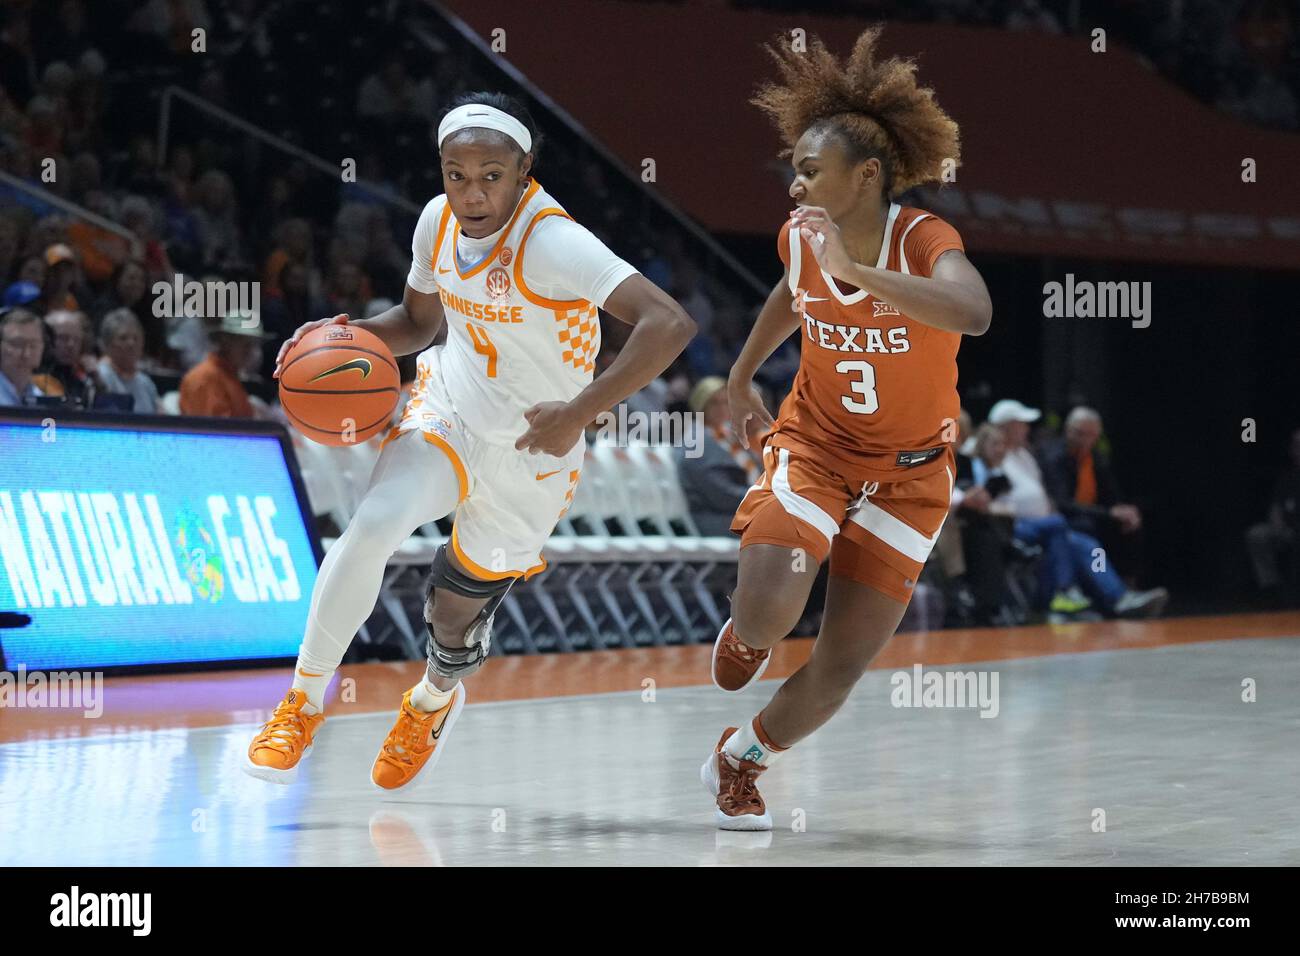 November 21, 2021: Jordan Walker #4 of the Tennessee Lady Vols drives to  the basket against Rori Harmon #3 of the Texas Longhorns during the NCAA  basketball game between the University of